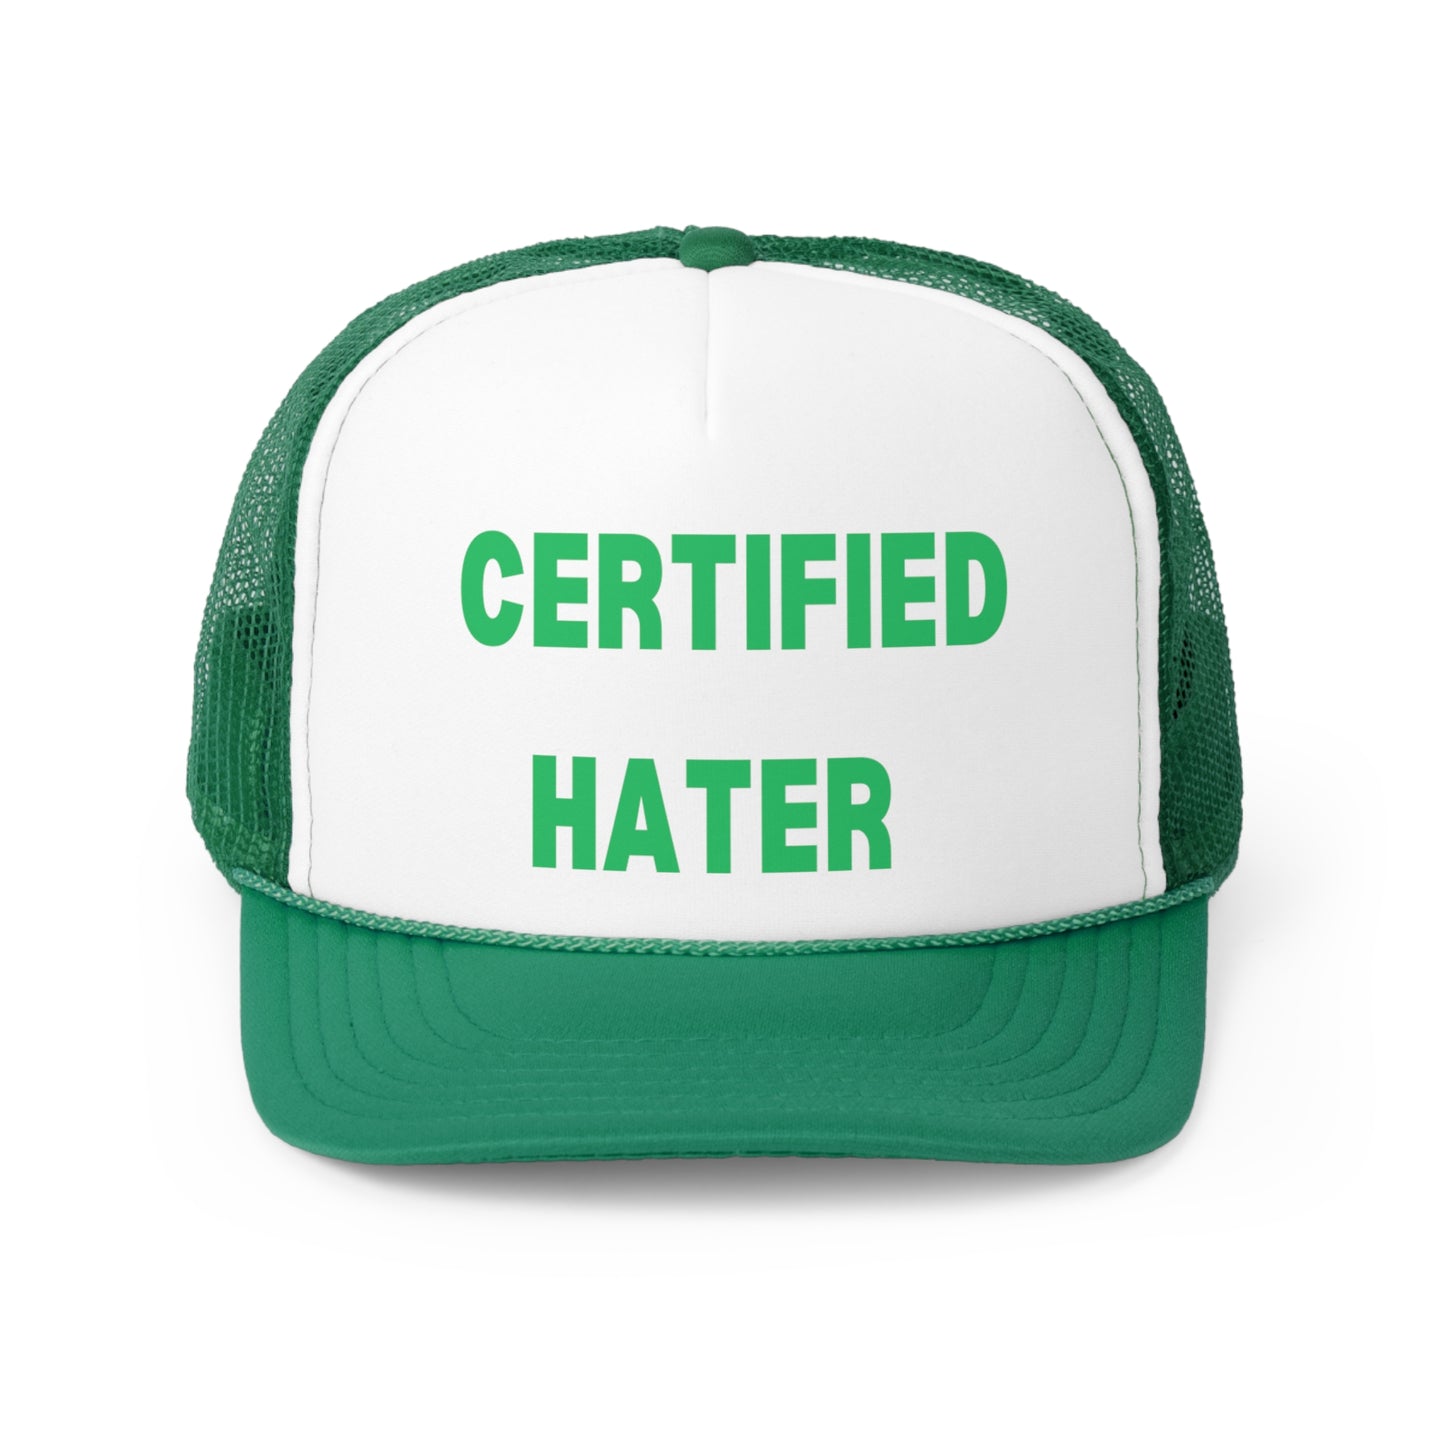 Certified Hater - Hat